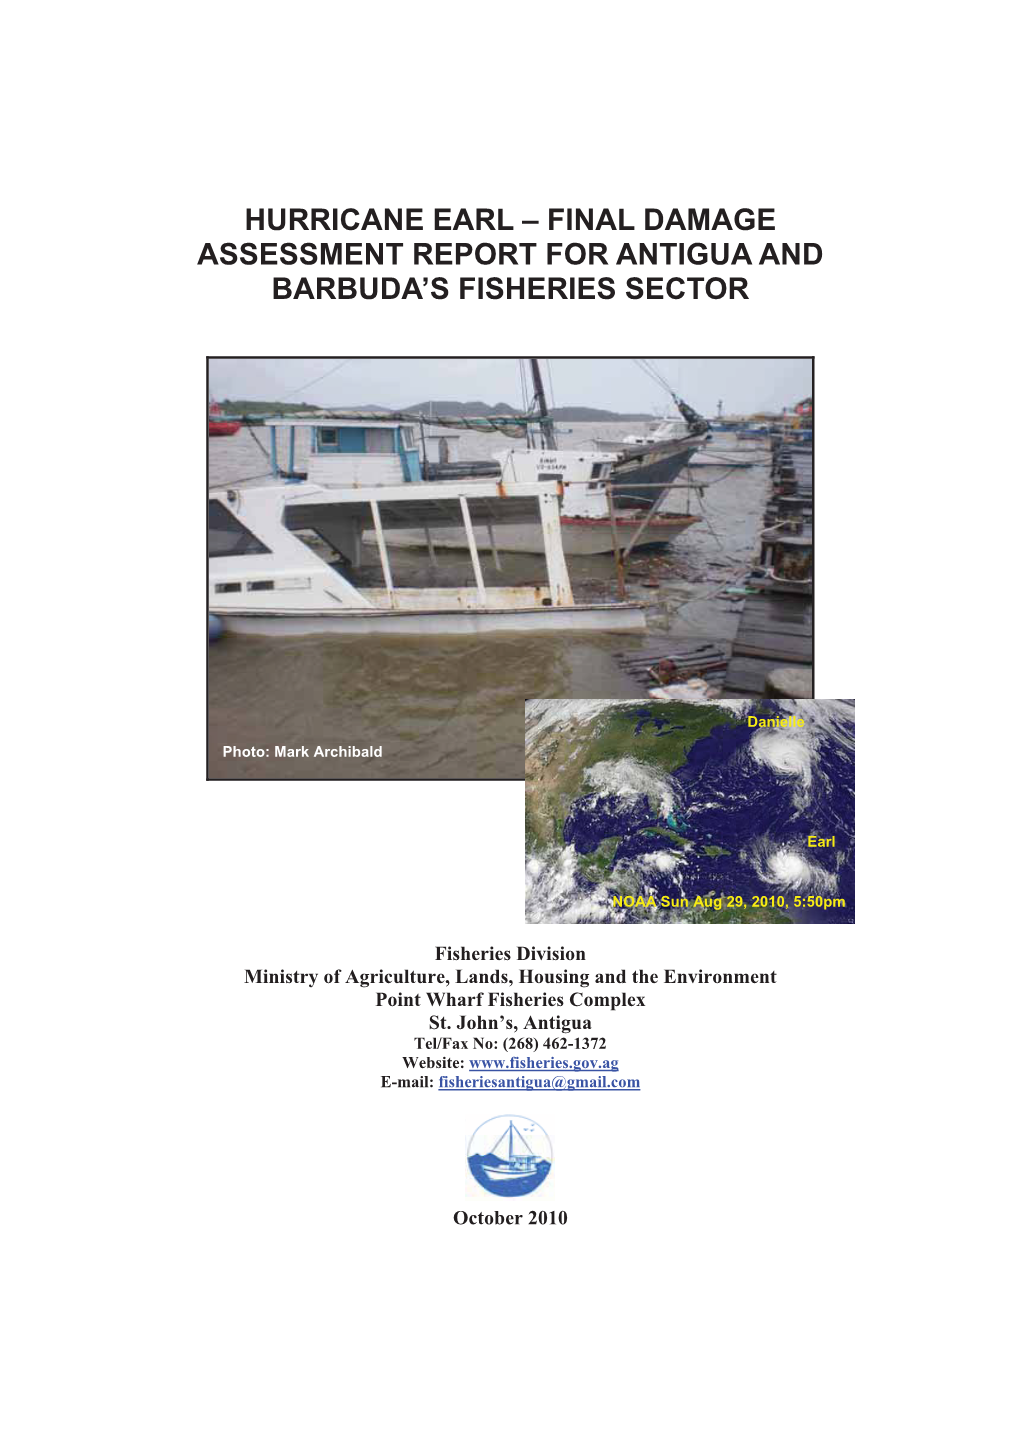 Hurricane Earl – Final Damage Assessment Report for Antigua and Barbuda’S Fisheries Sector